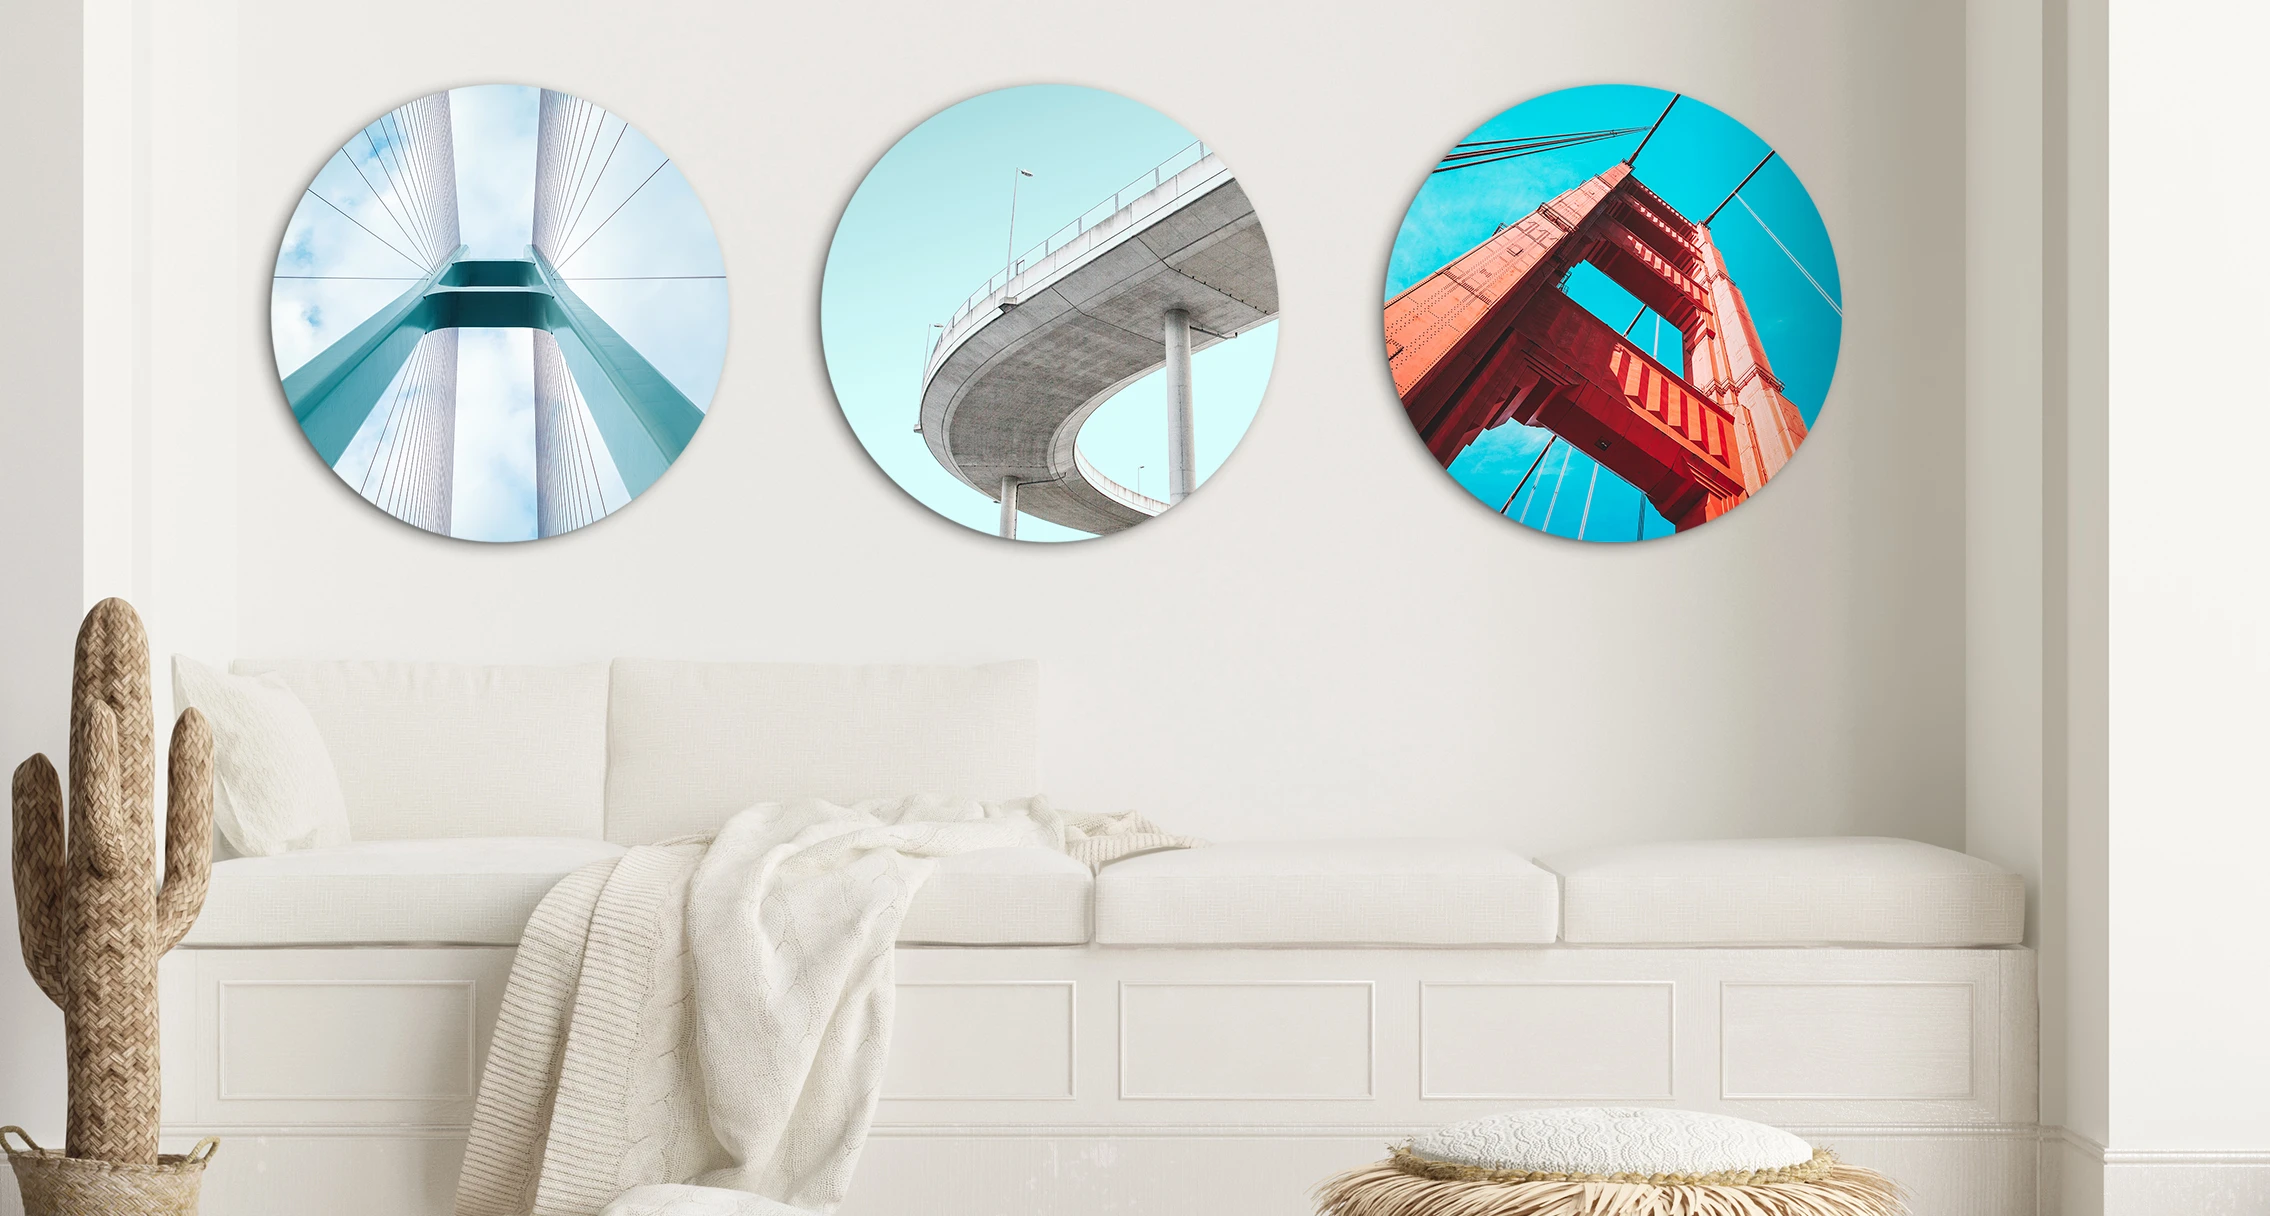 3 different round pictures with street bridges are hung next to each other on a wall. 